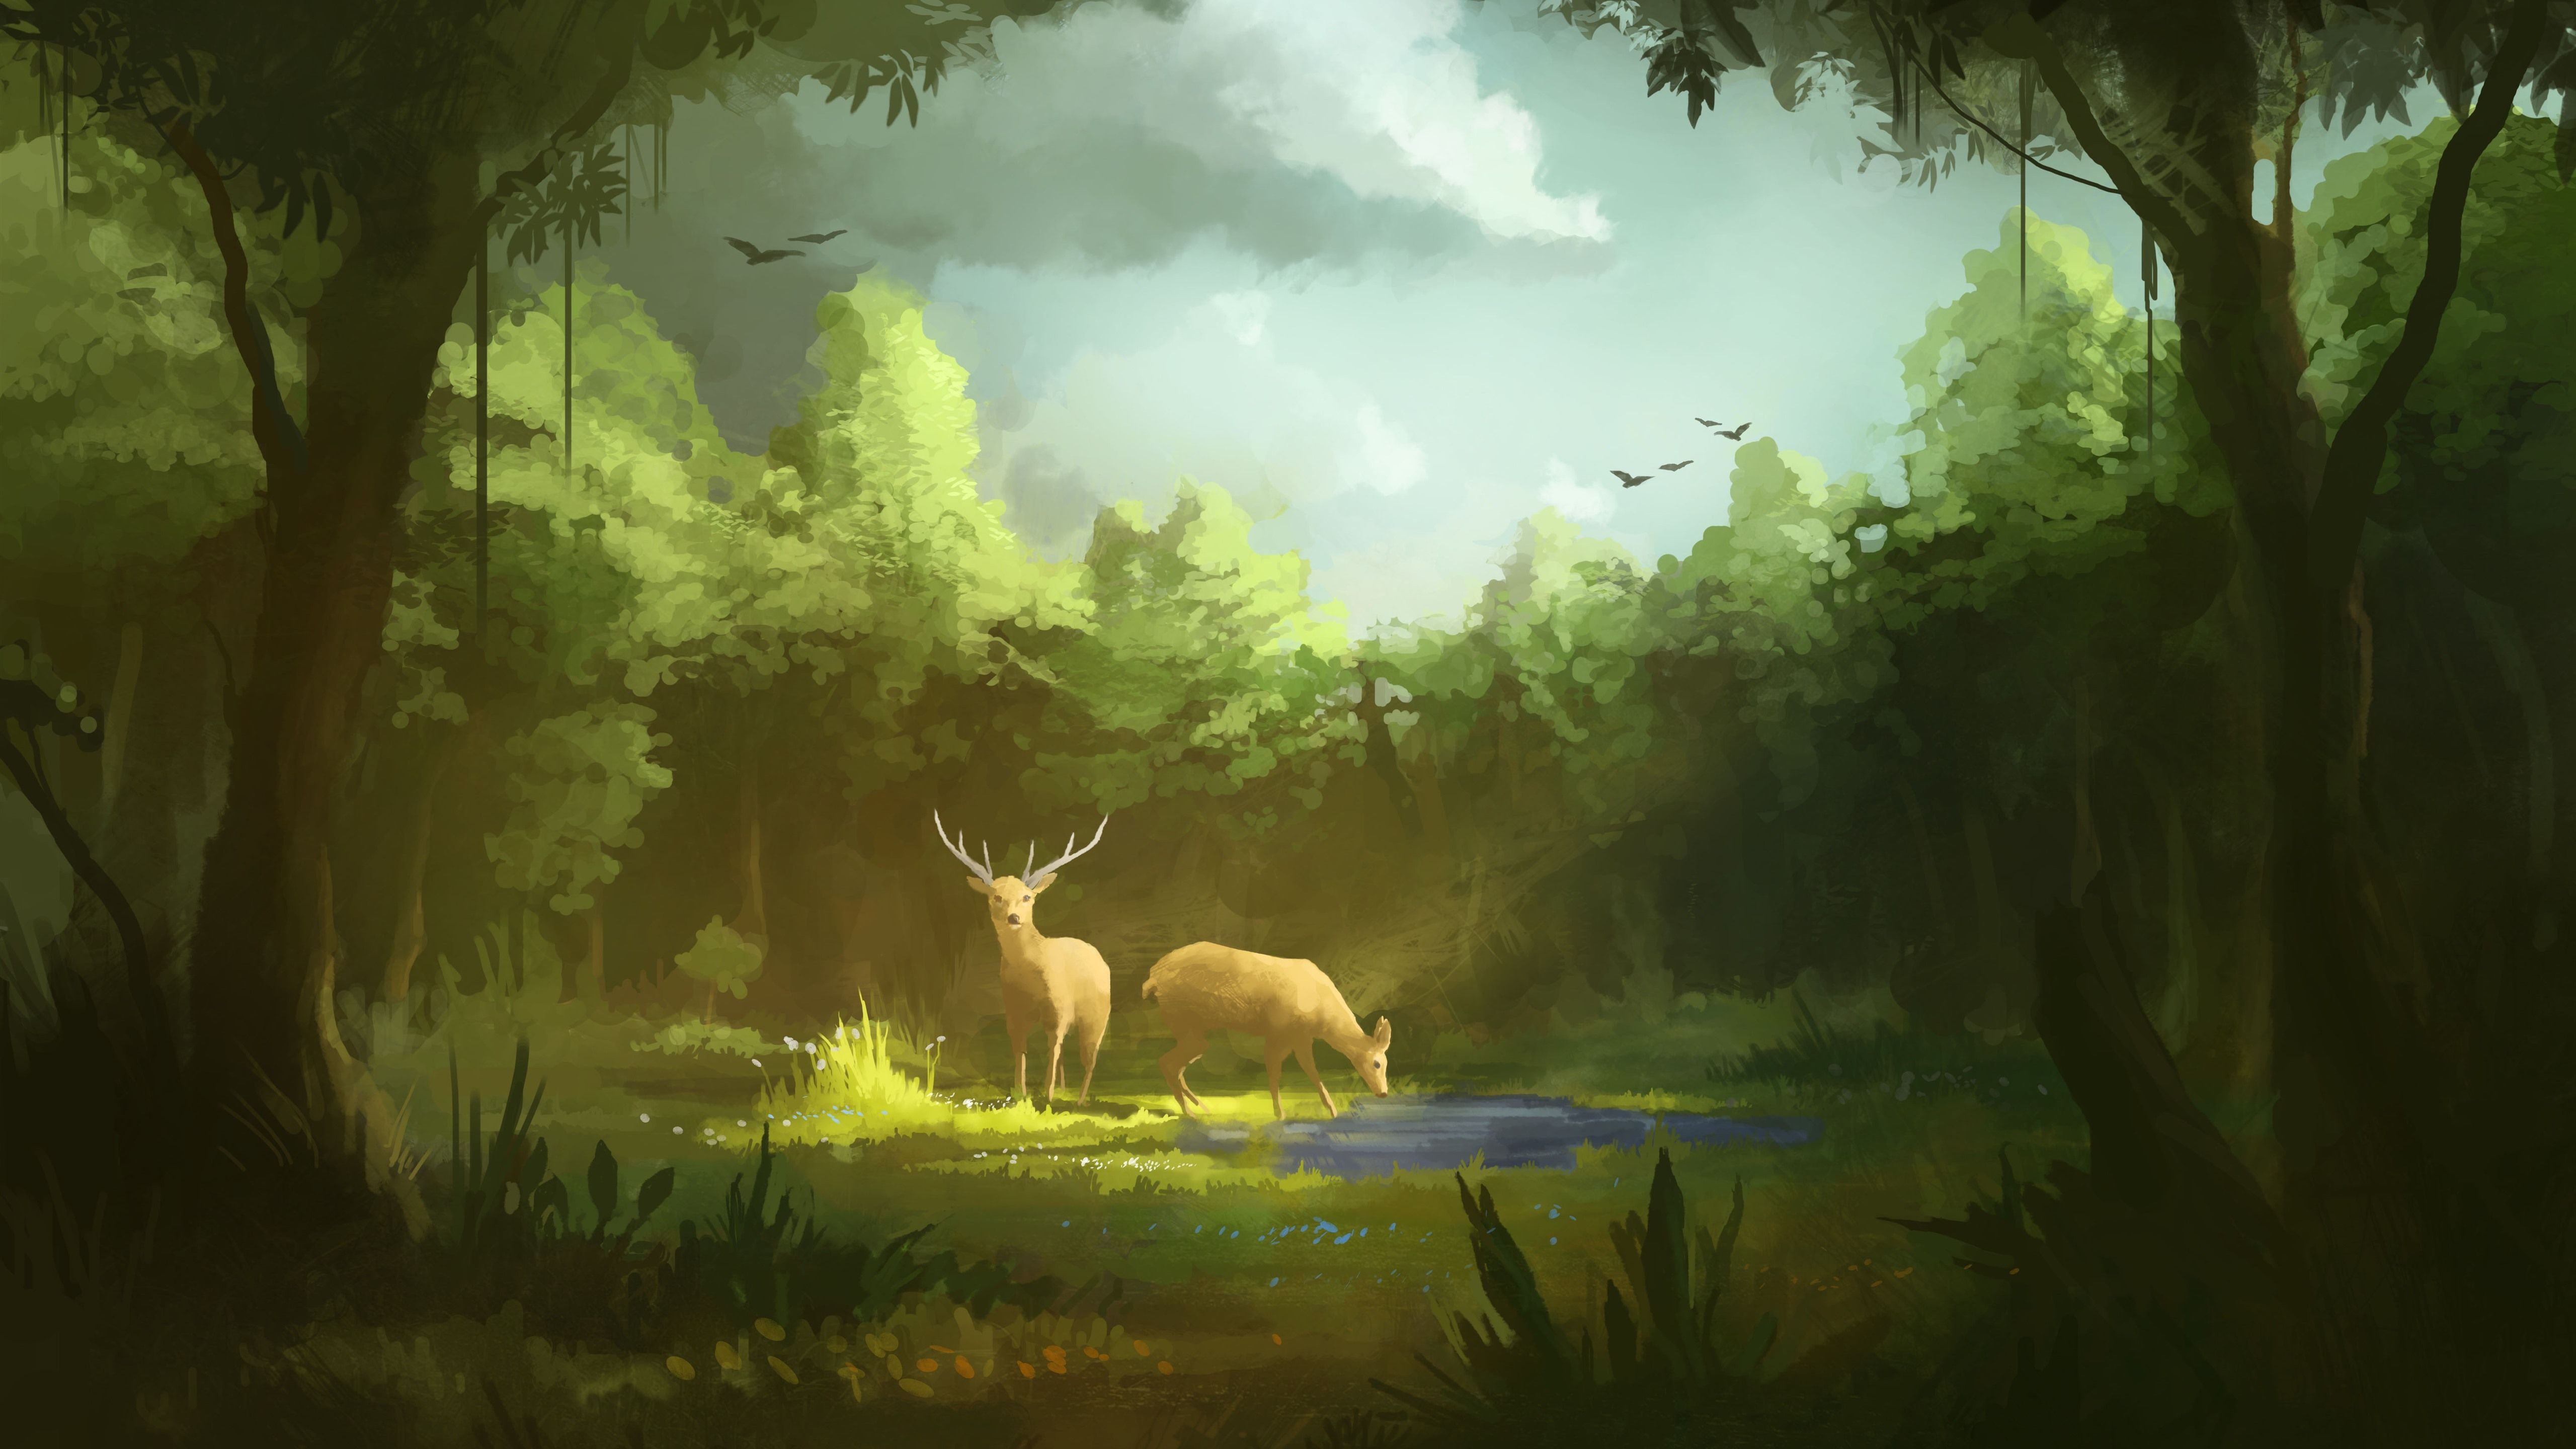 5120x2880 Wallpaper Art Painting Forest Deer 5120x2880 Uhd 5k Picture Image